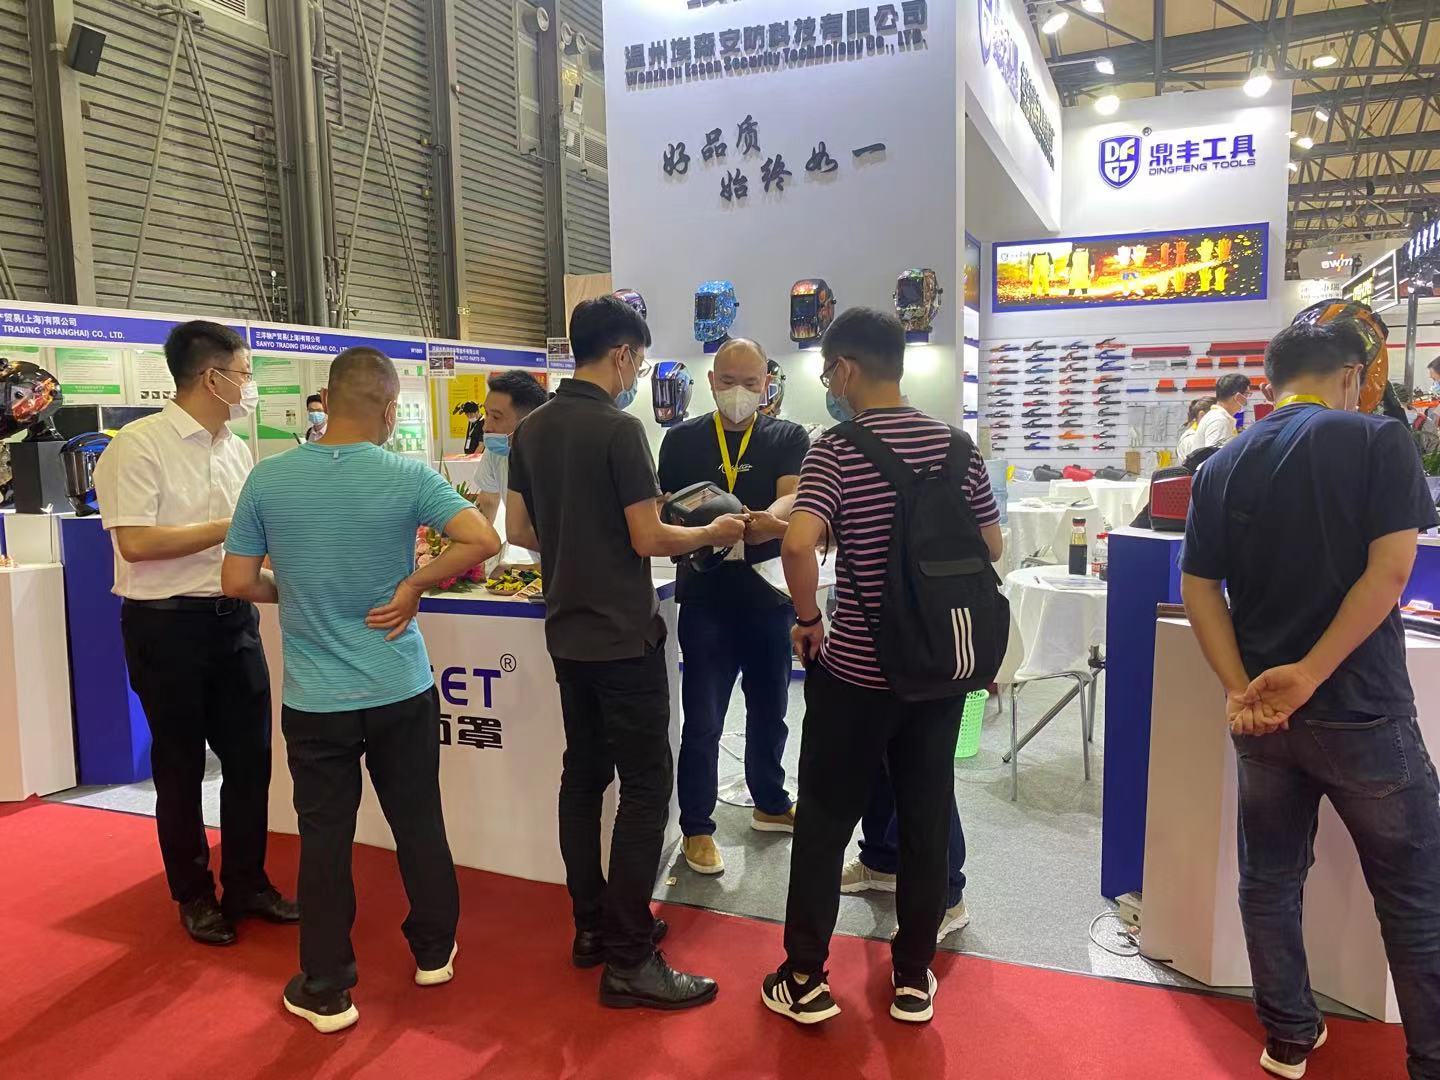 Perfectly ended the 25th Beijing Essen Welding Exhibition